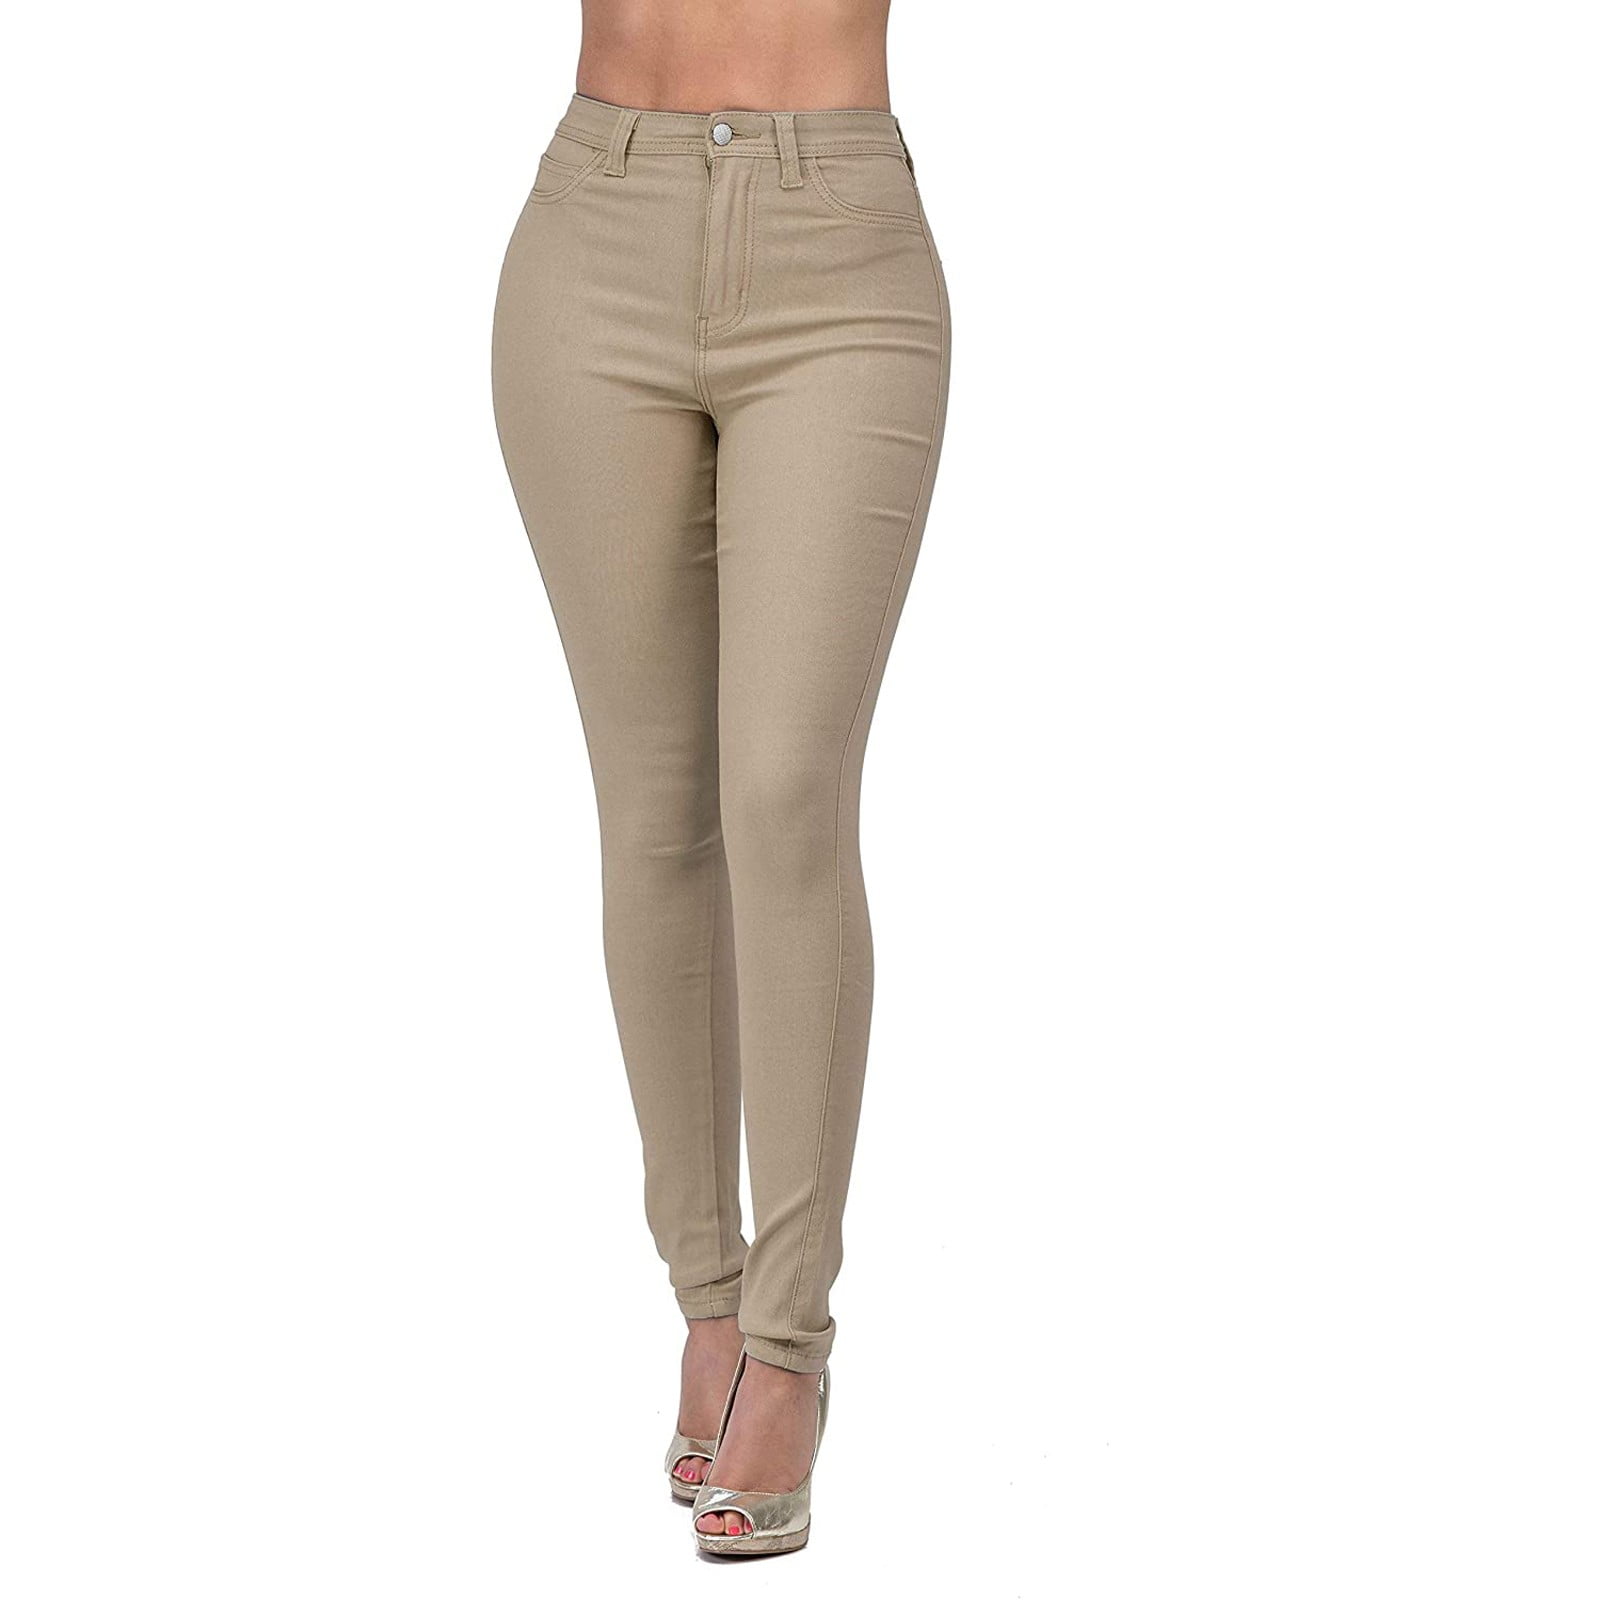 What to Wear With Brown Pants Female? [Updated January 2021] | Pant outfits  for women, Brown pants outfit, Slacks for women